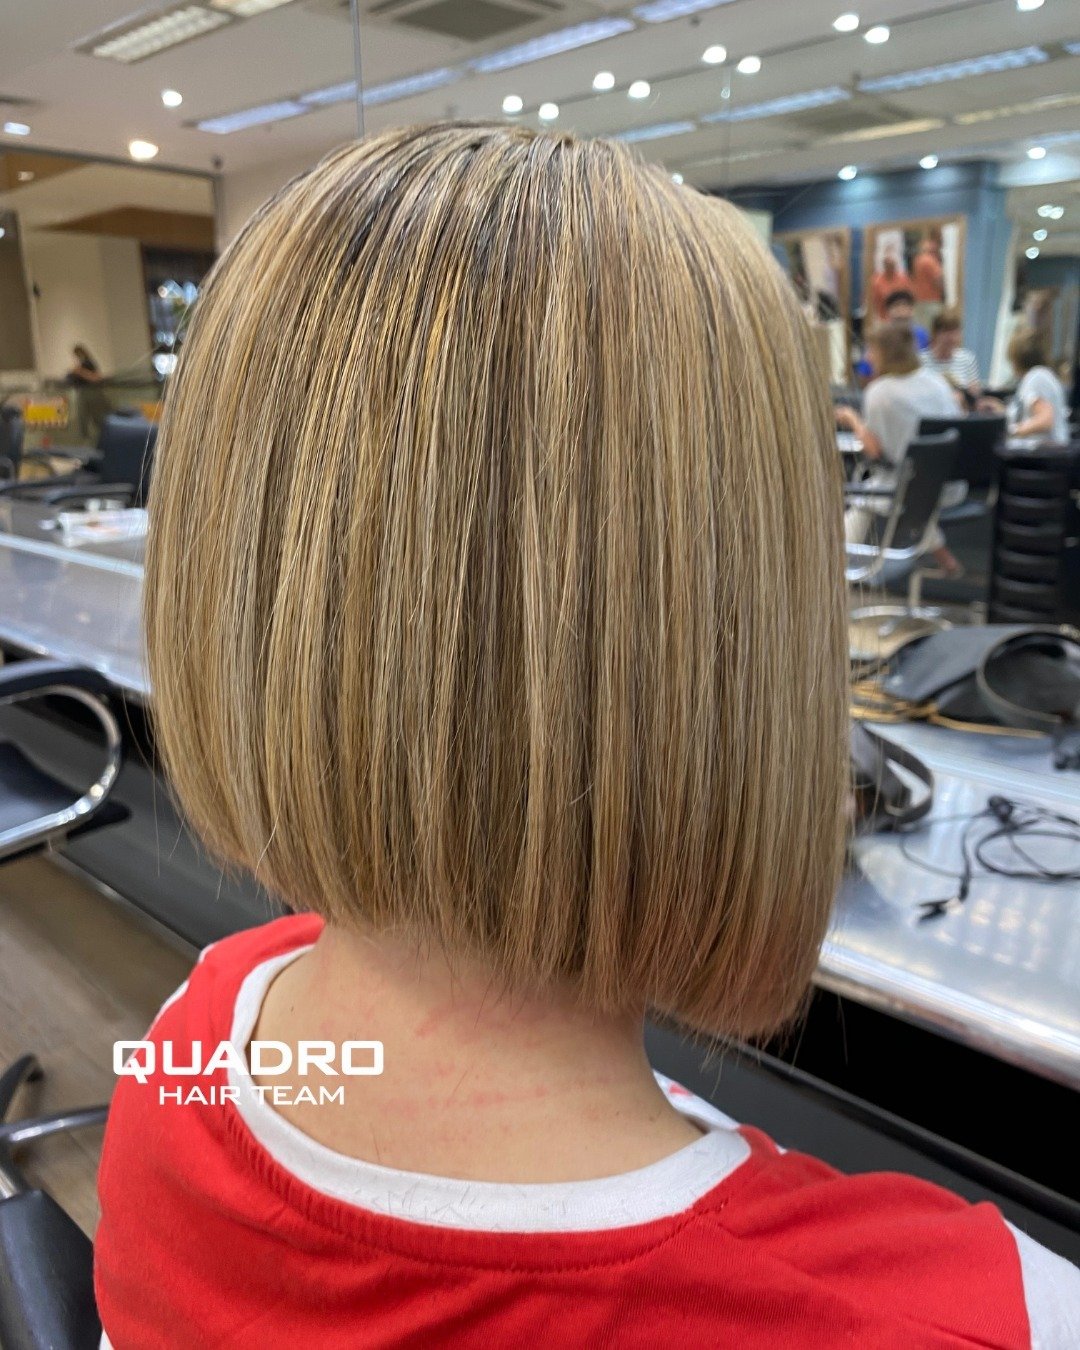 Fresh angled bob for the weekend ✂️⁠
⁠
Pop-in or book ahead, Mon to Sat ⁠
&quot;Bringing hair dream to life&quot; 💫⁠
⁠
#quadrohairteam #wheelershillsalon #hairdresser #hair #blonde ⁠
#hairstyle #hairinspo #beauty #hairgrowth #hairgoals #mua